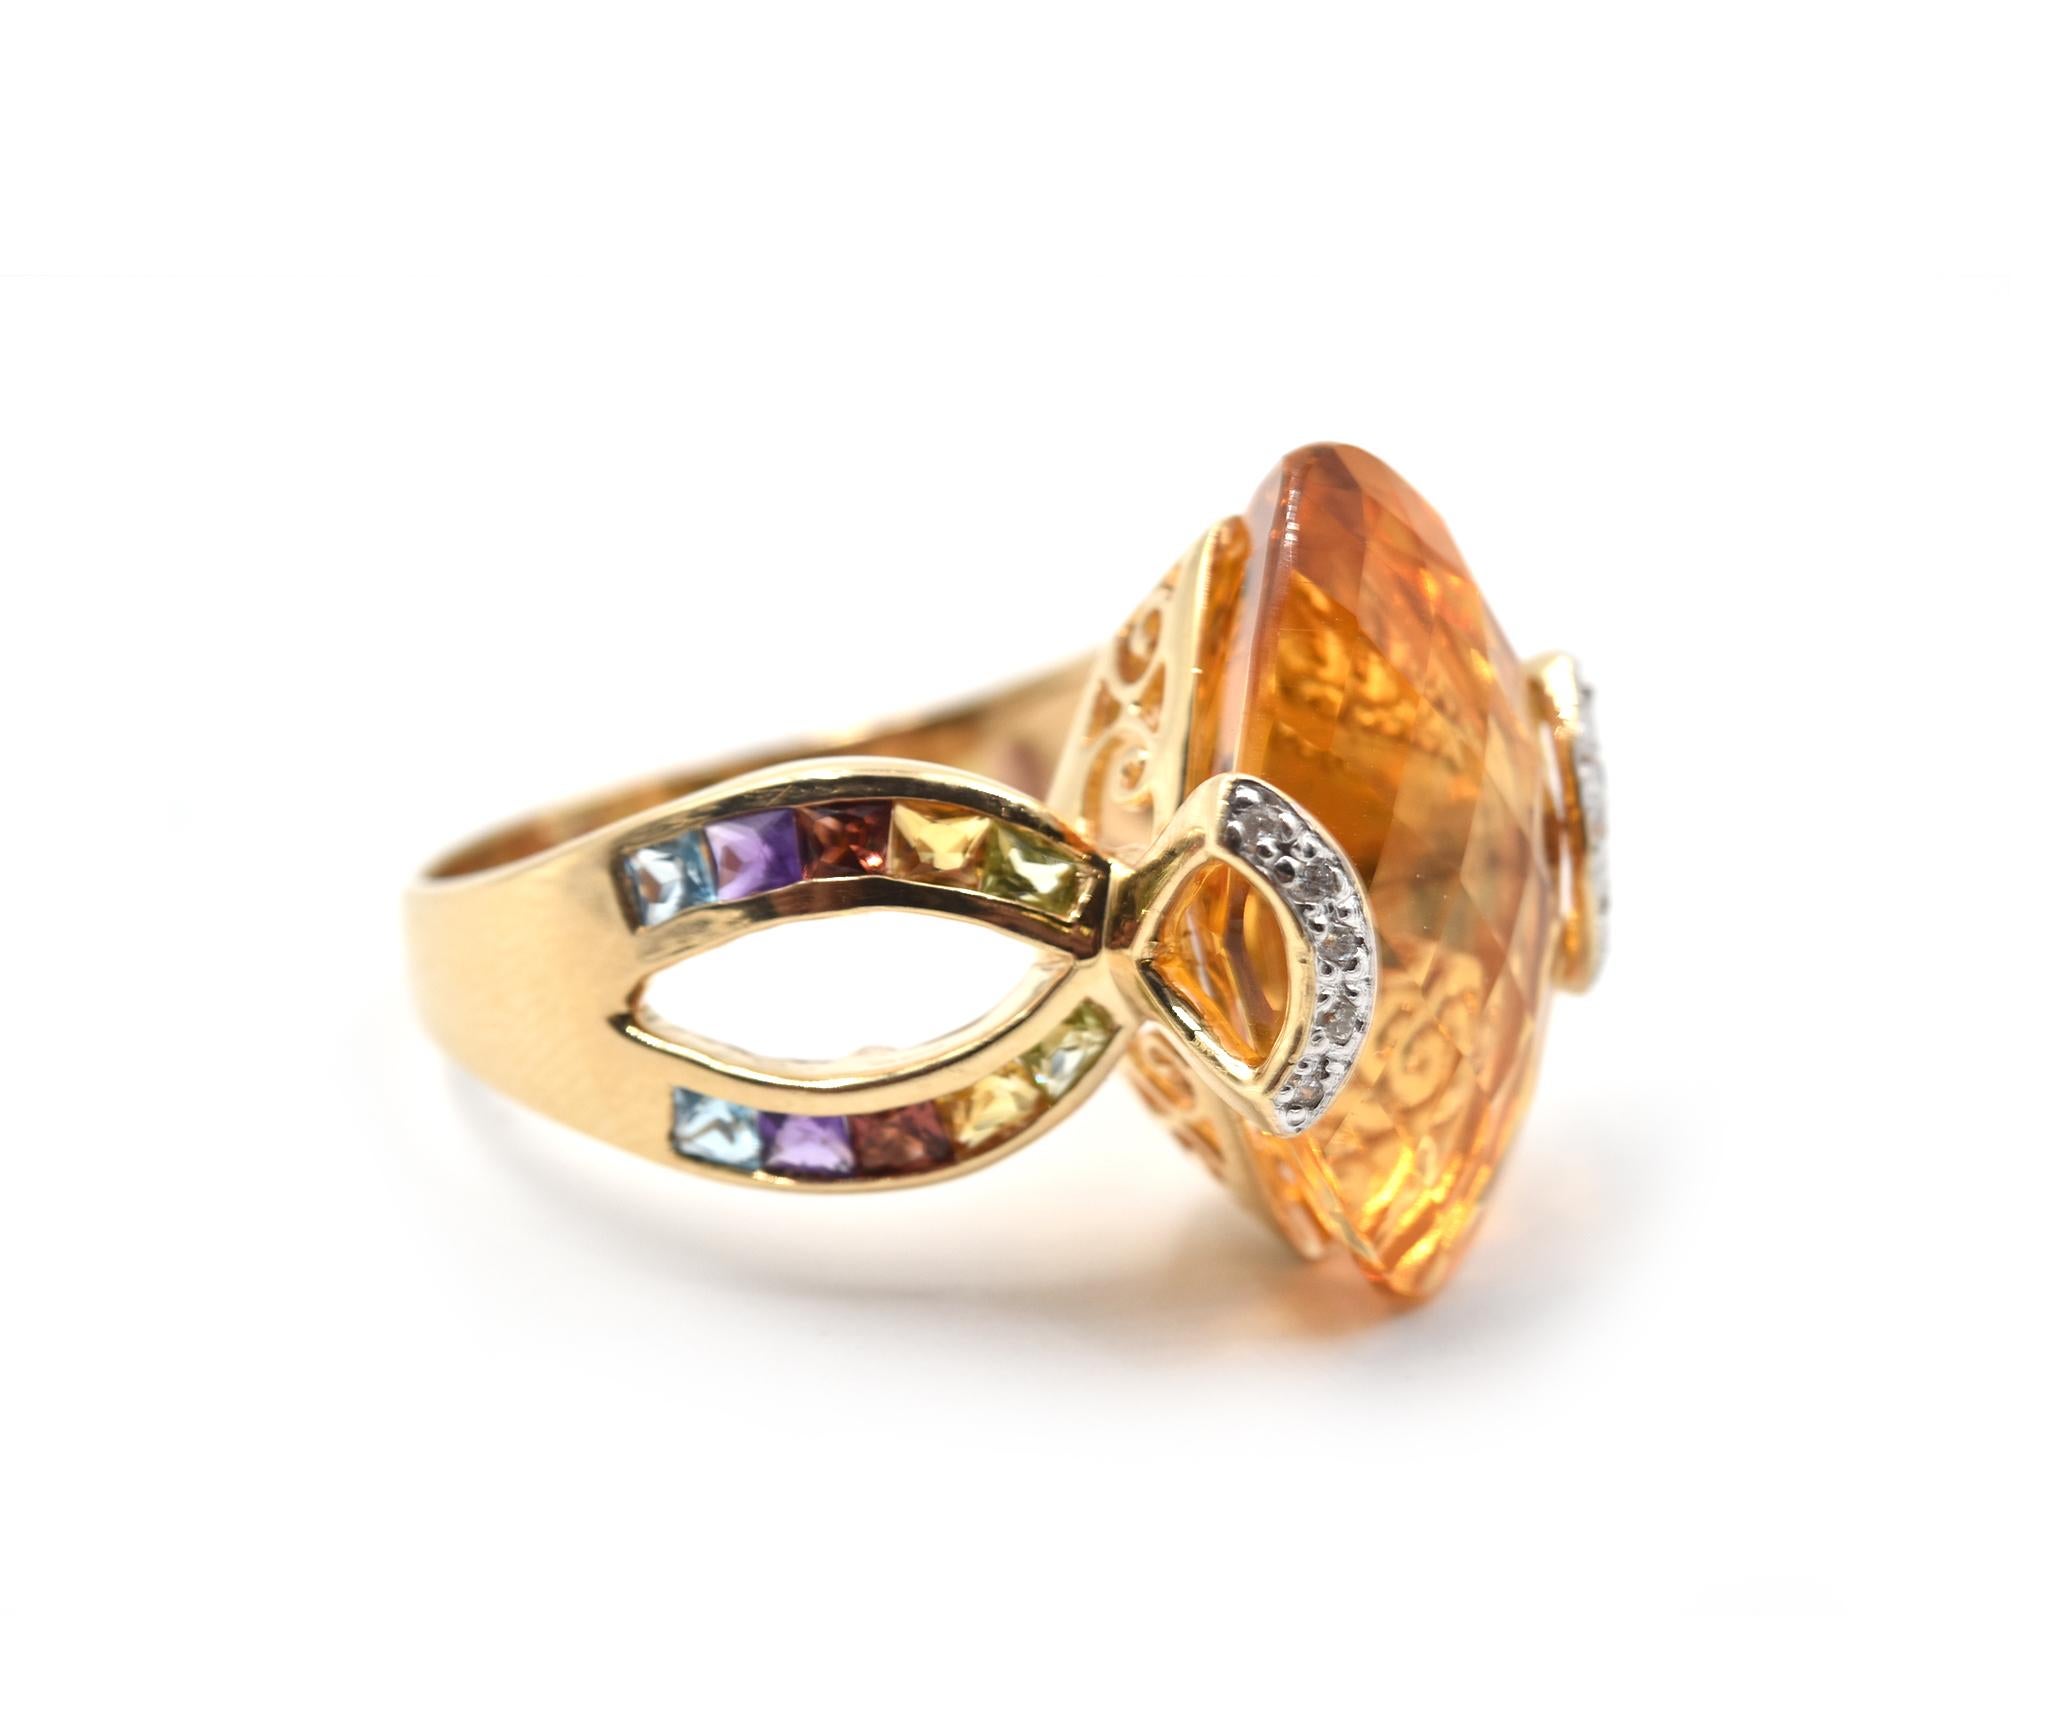 Designer: custom design
Material: 14k yellow gold
Citrine: 11.35 ct
Diamonds: 10 Round Diamonds = .05cttw
Color: G/H
Clarity: SI1
Ring Size: 10  (please allow two additional shipping days for sizing requests)
Weight: 10.01 grams
